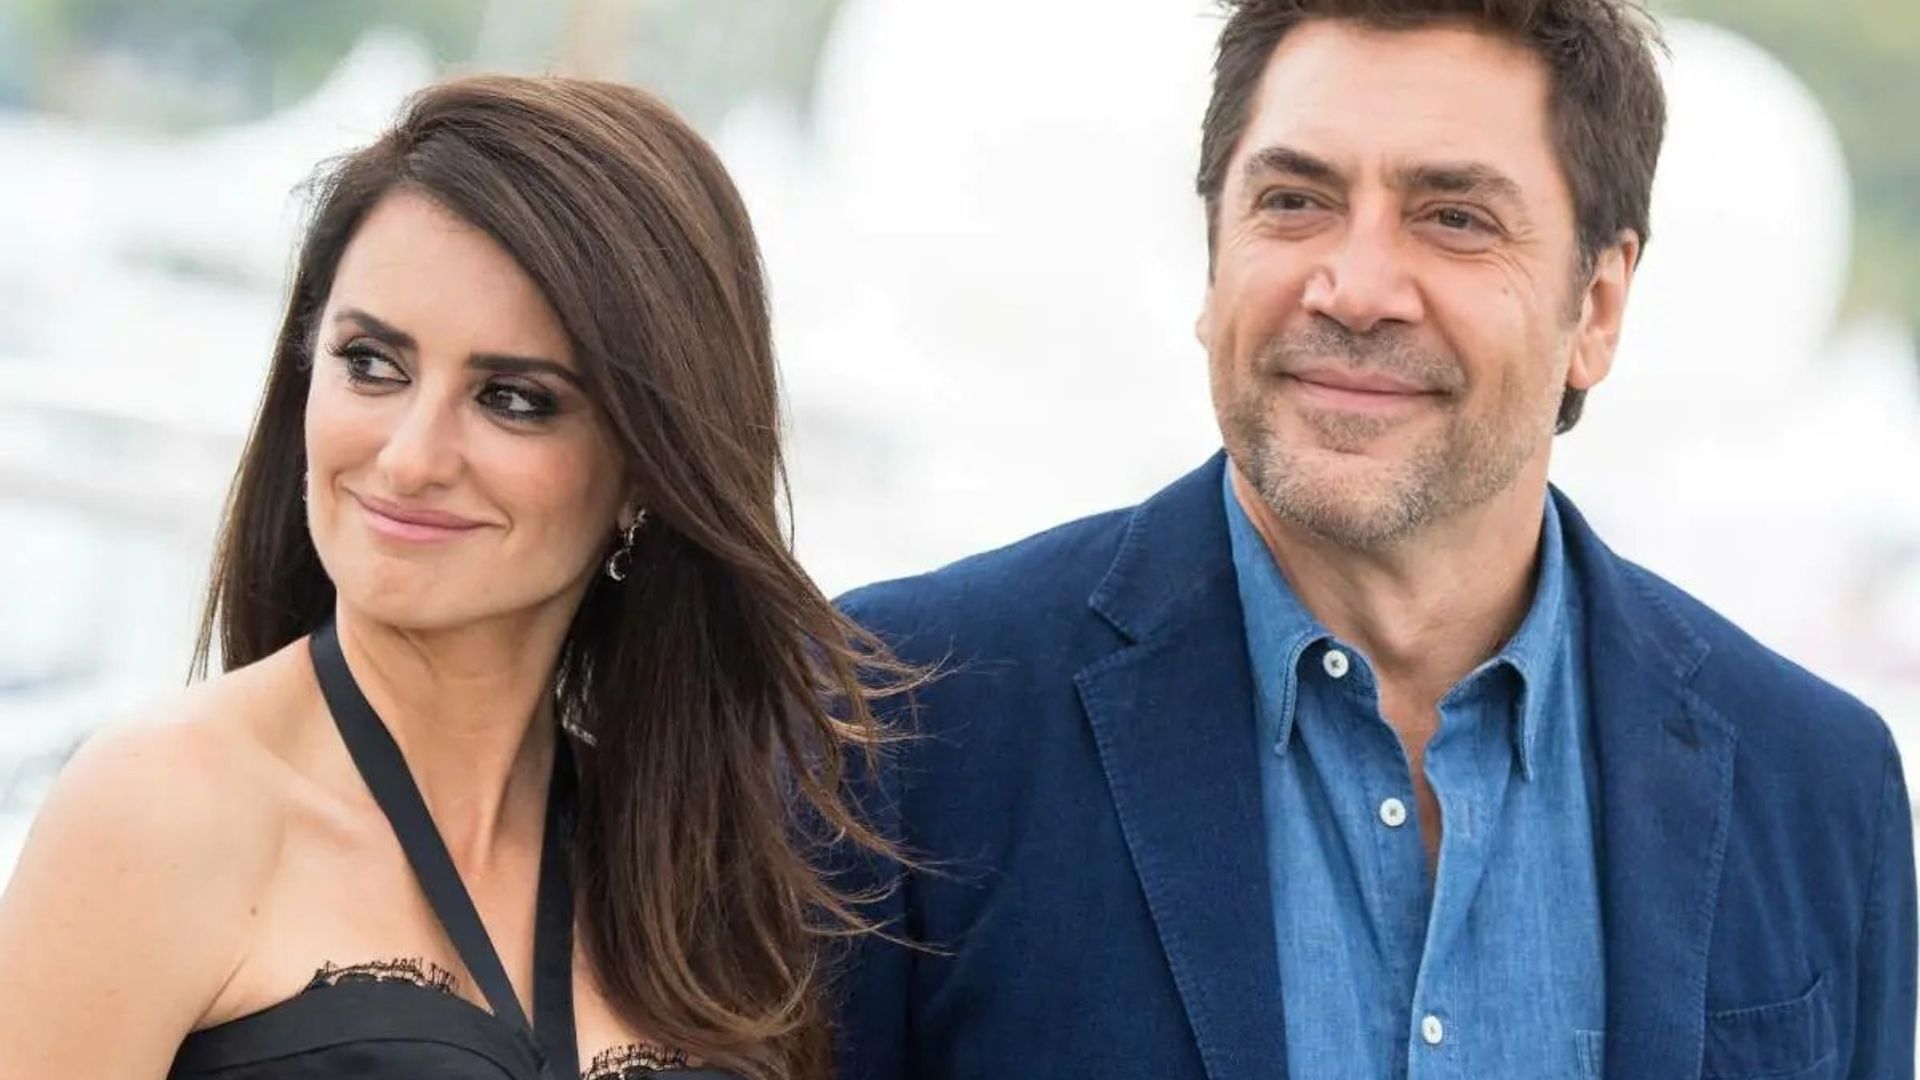 All you need to know about Penelope Cruz and Javier Bardem's relationship